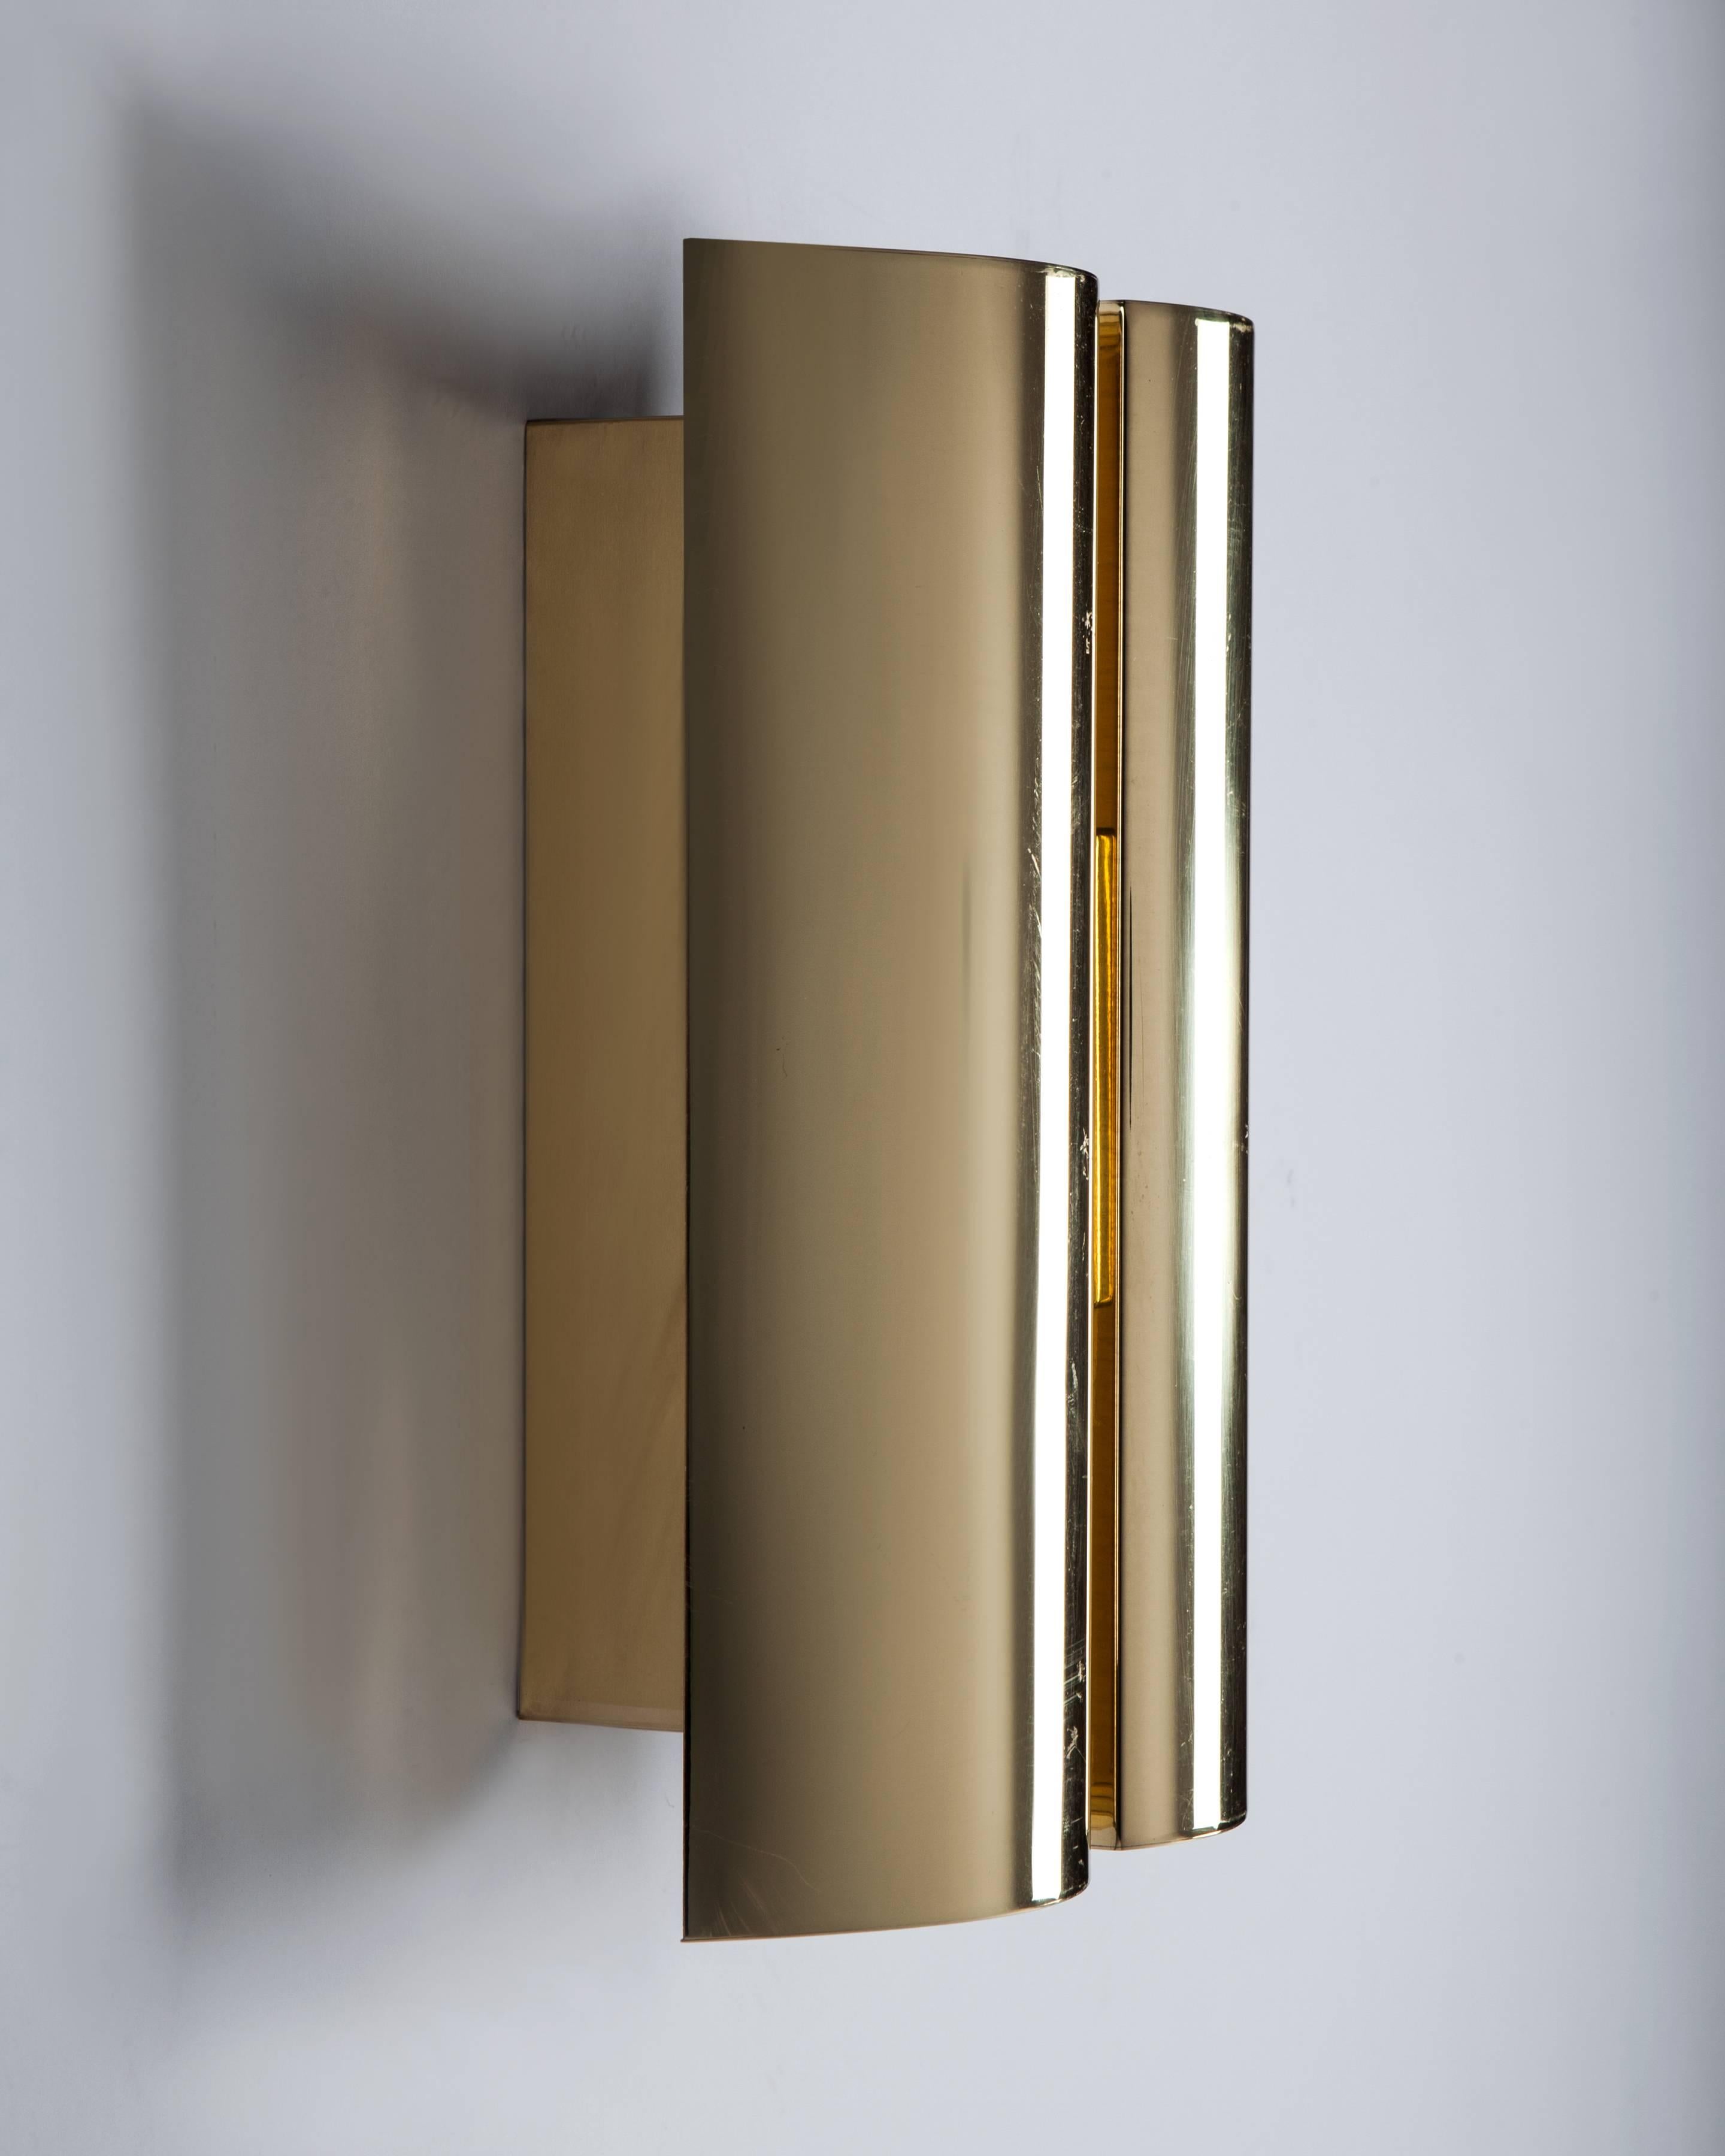 AIS3015
A pair of vintage wall sconces in their original lacquered brass finish. Signed by the Swedish maker Fagerhults.